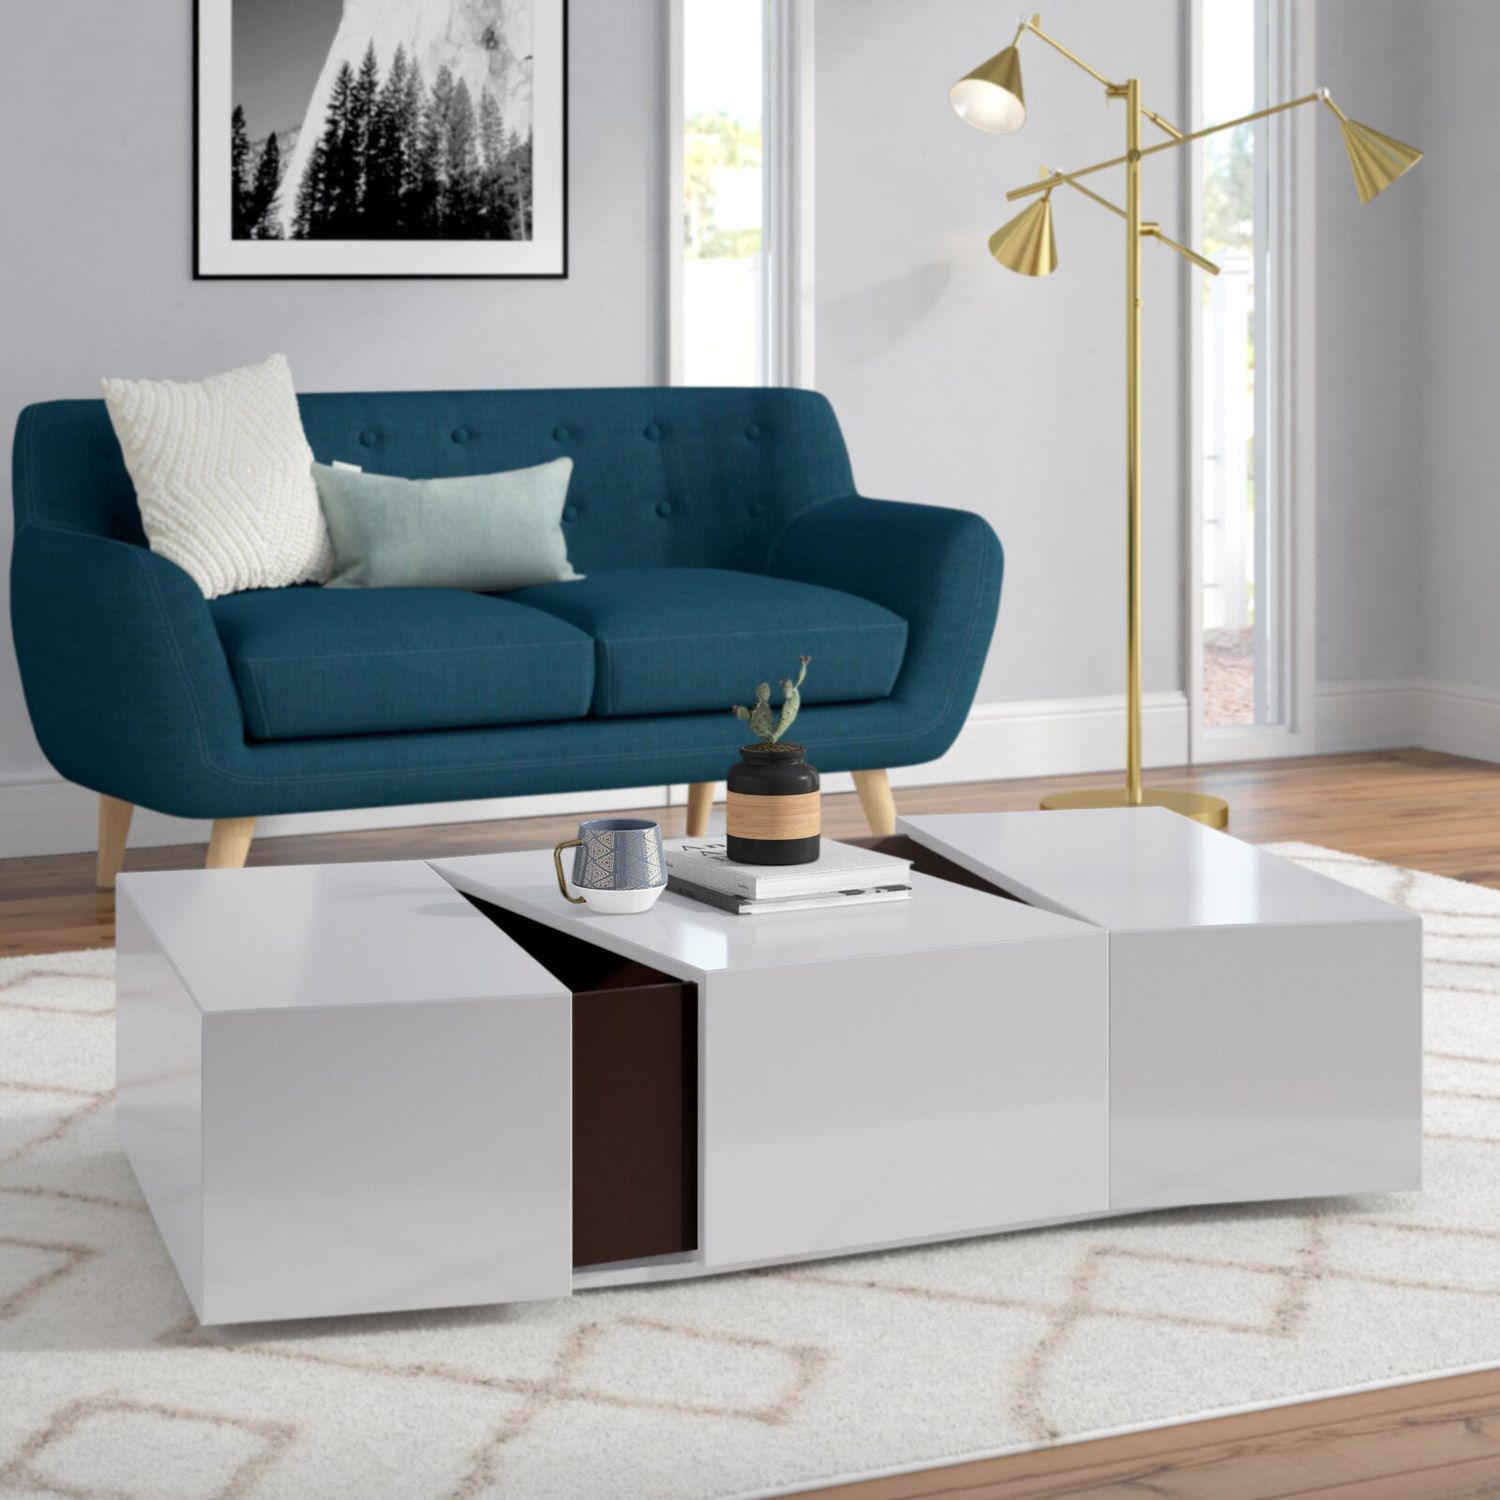 Sleek Modern Coffee Table With Hidden Storage | The Green Head With Modern Coffee Tables With Hidden Storage Compartments (View 3 of 15)